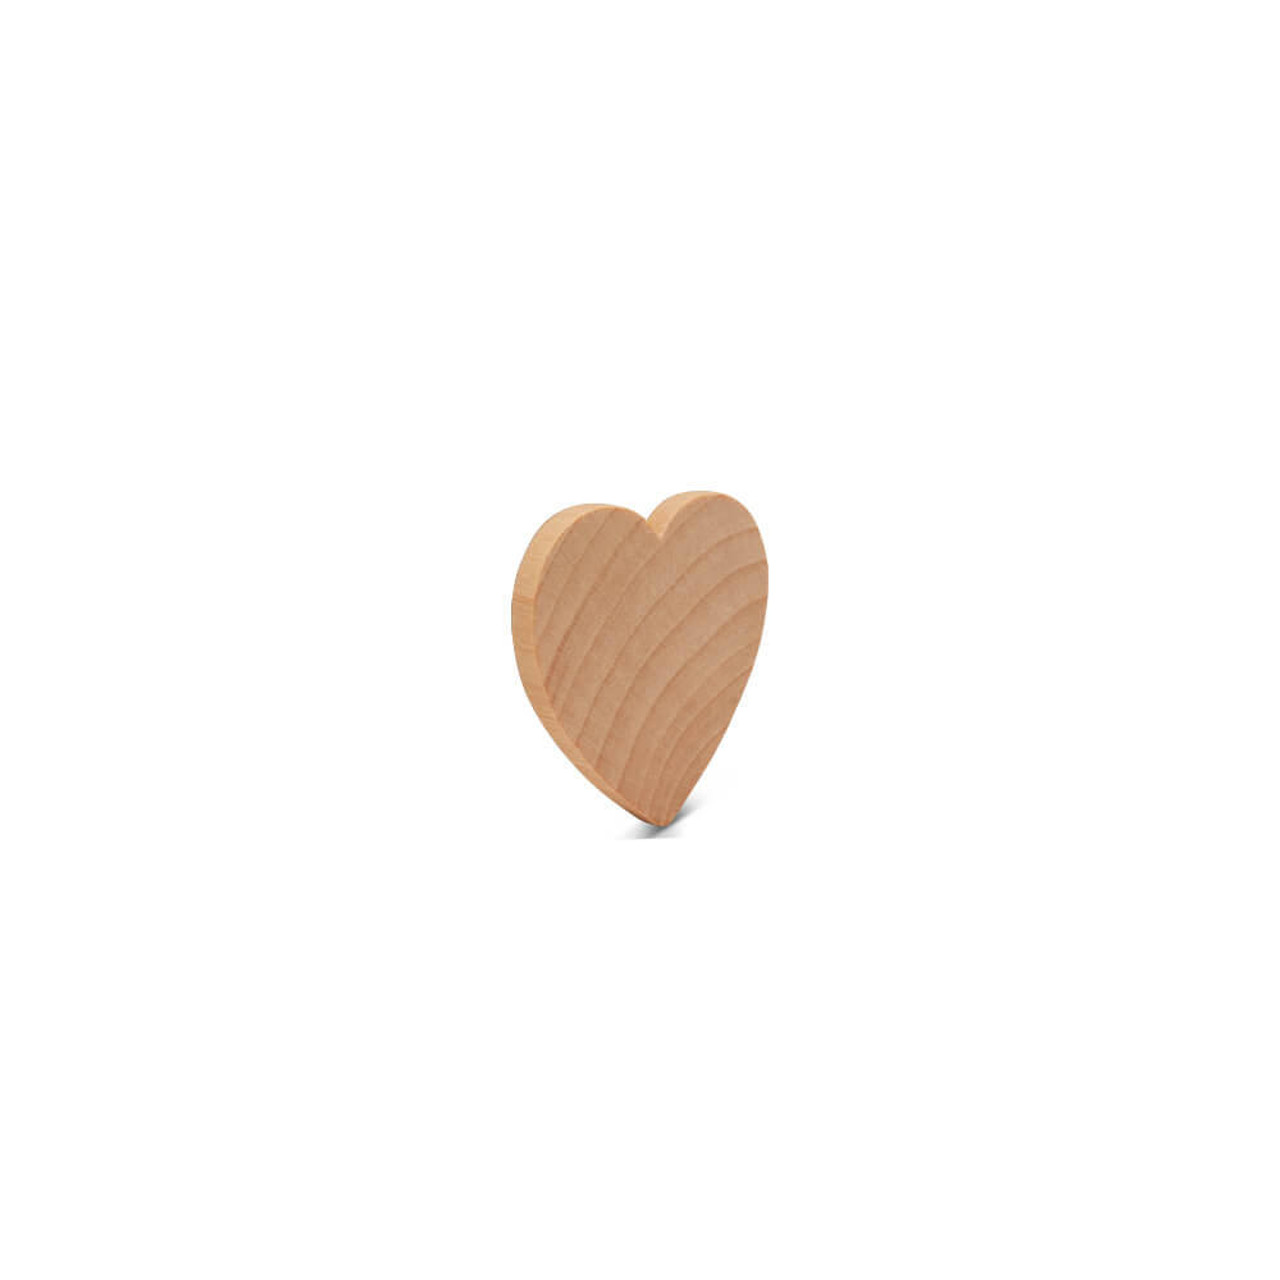 Wooden Heart Cutouts 12 inch, 1/4 inch Thick, Pack of 5 Unfinished Wooden  Hearts for Crafting, DIY Décor and Sign Blanks, by Woodpeckers